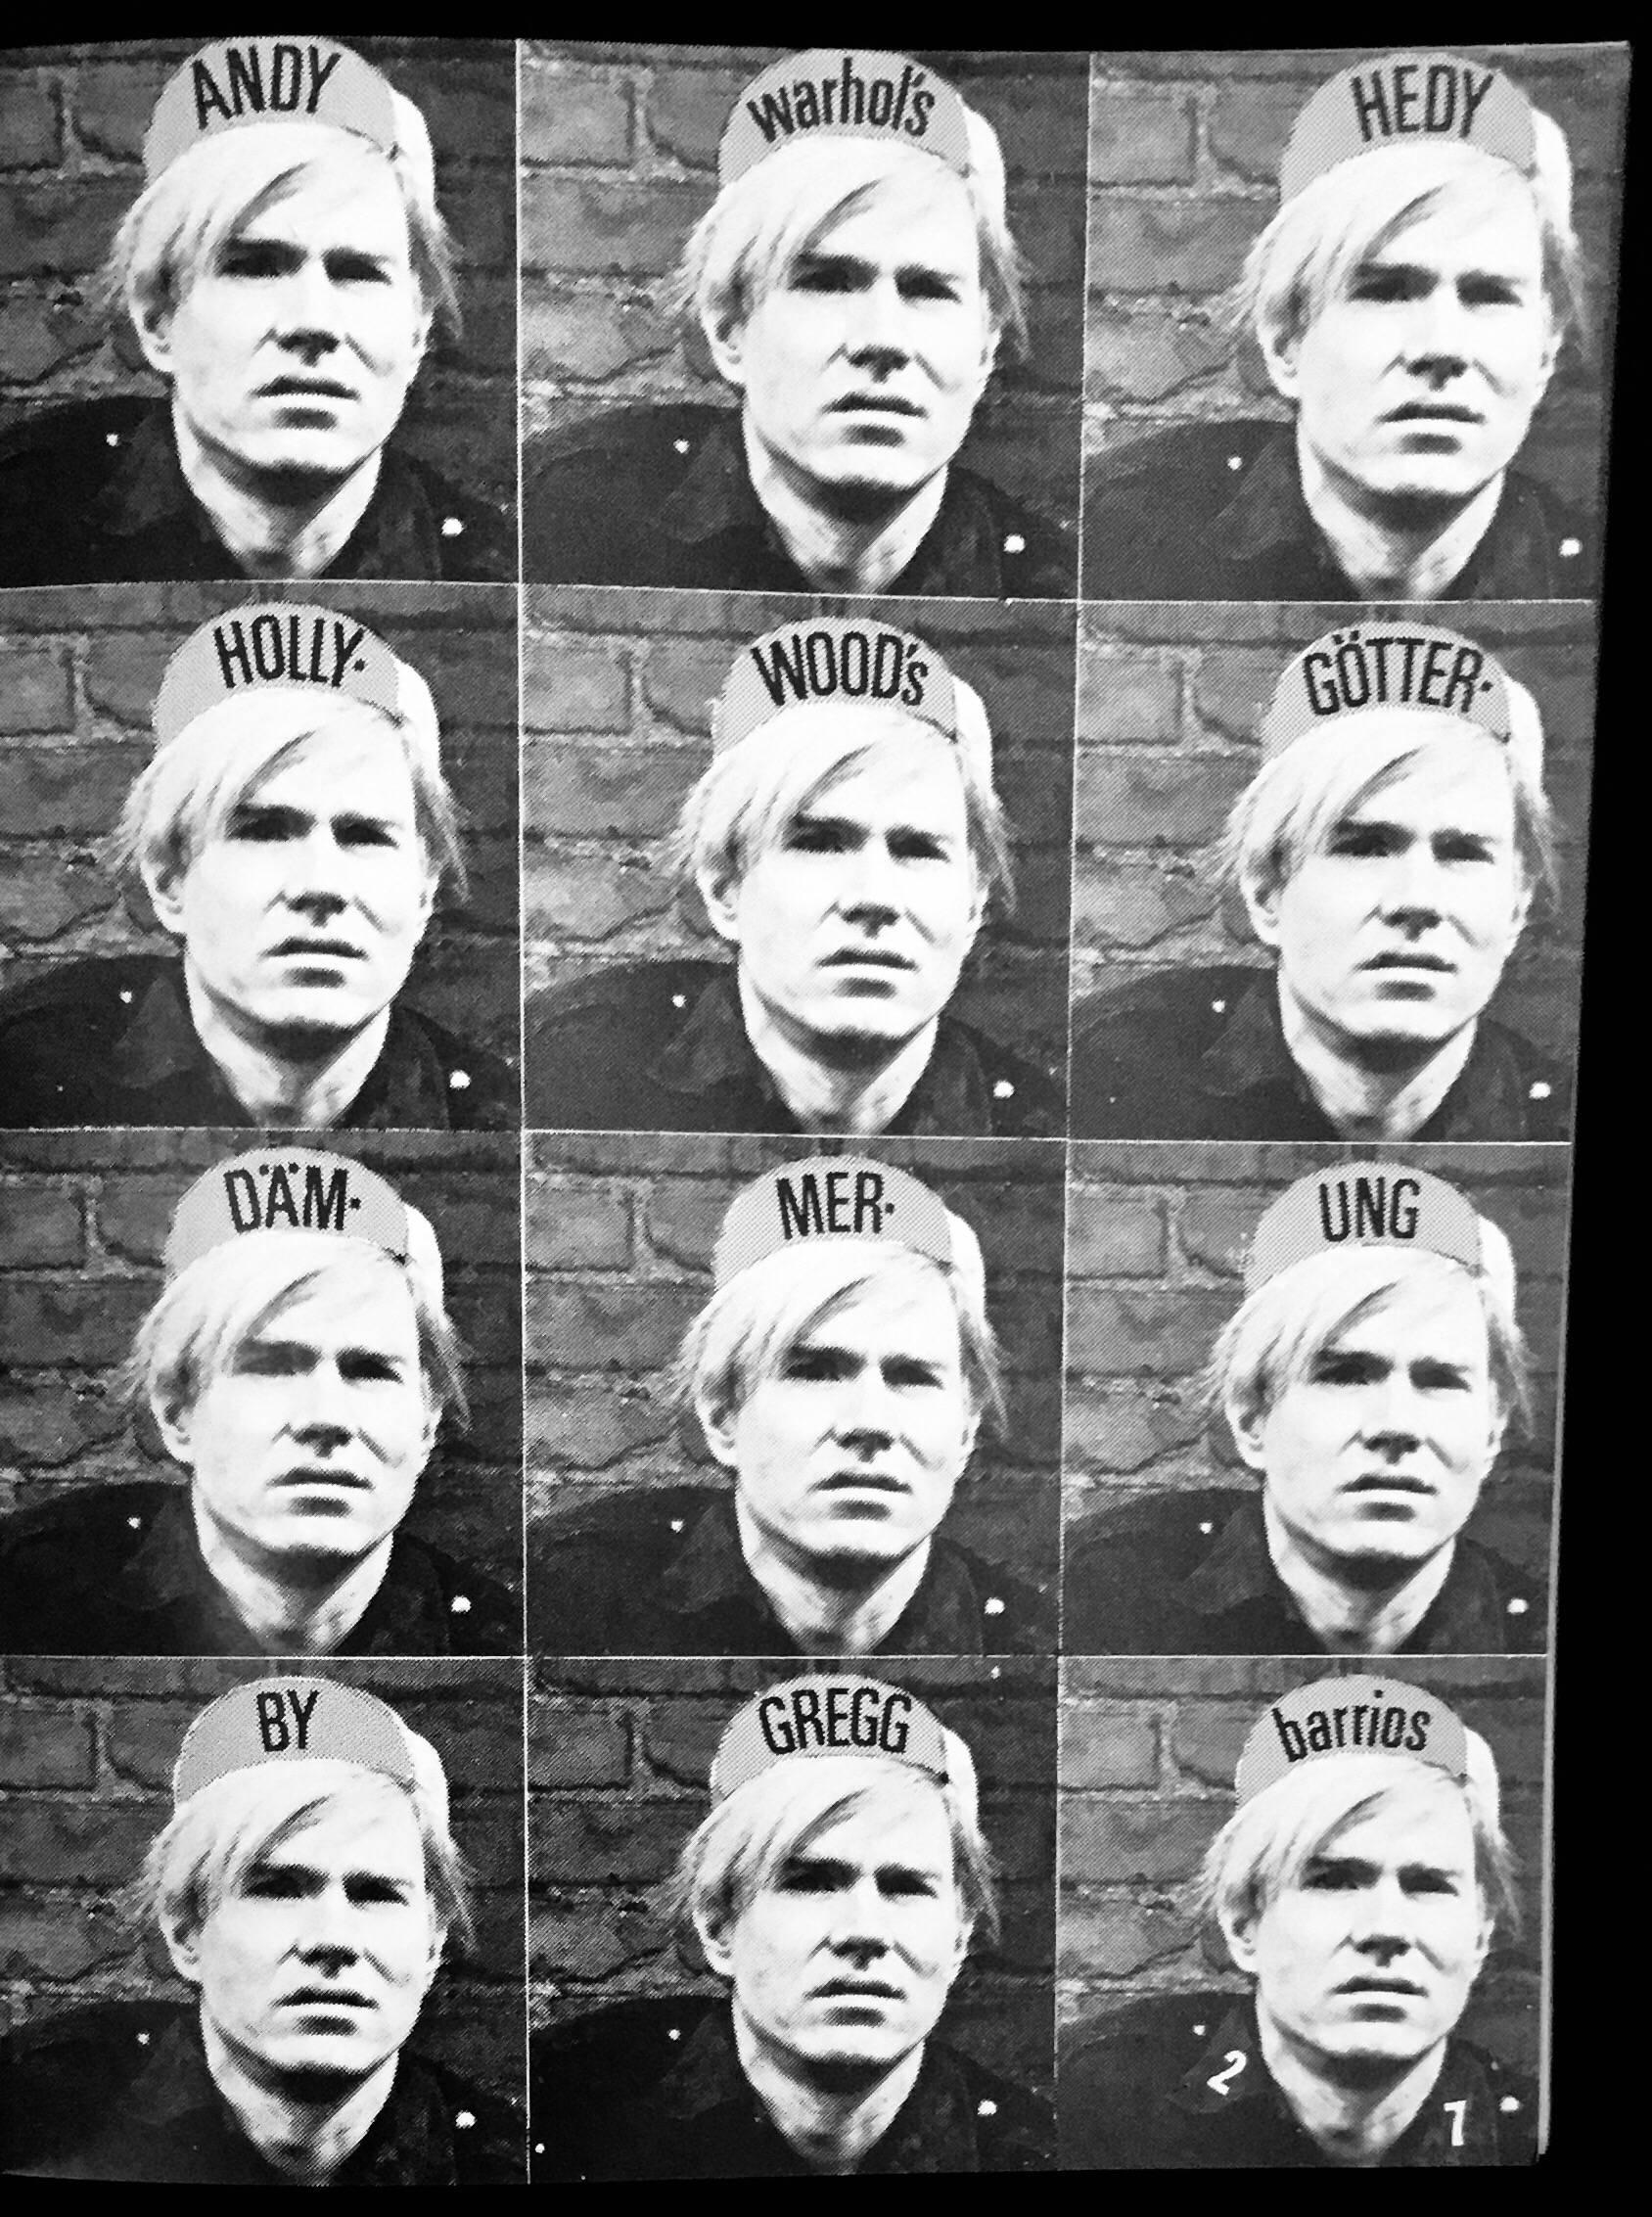 Andy Warhol, Film Culture 1967:
Film Culture magazine, 1967. First edition. Featuring imagery and cover design by Andy Warhol. A rare 1967 issue devoted to Warhol films.  Warhol designed the cover using portraits taken in a photo booth for the cover